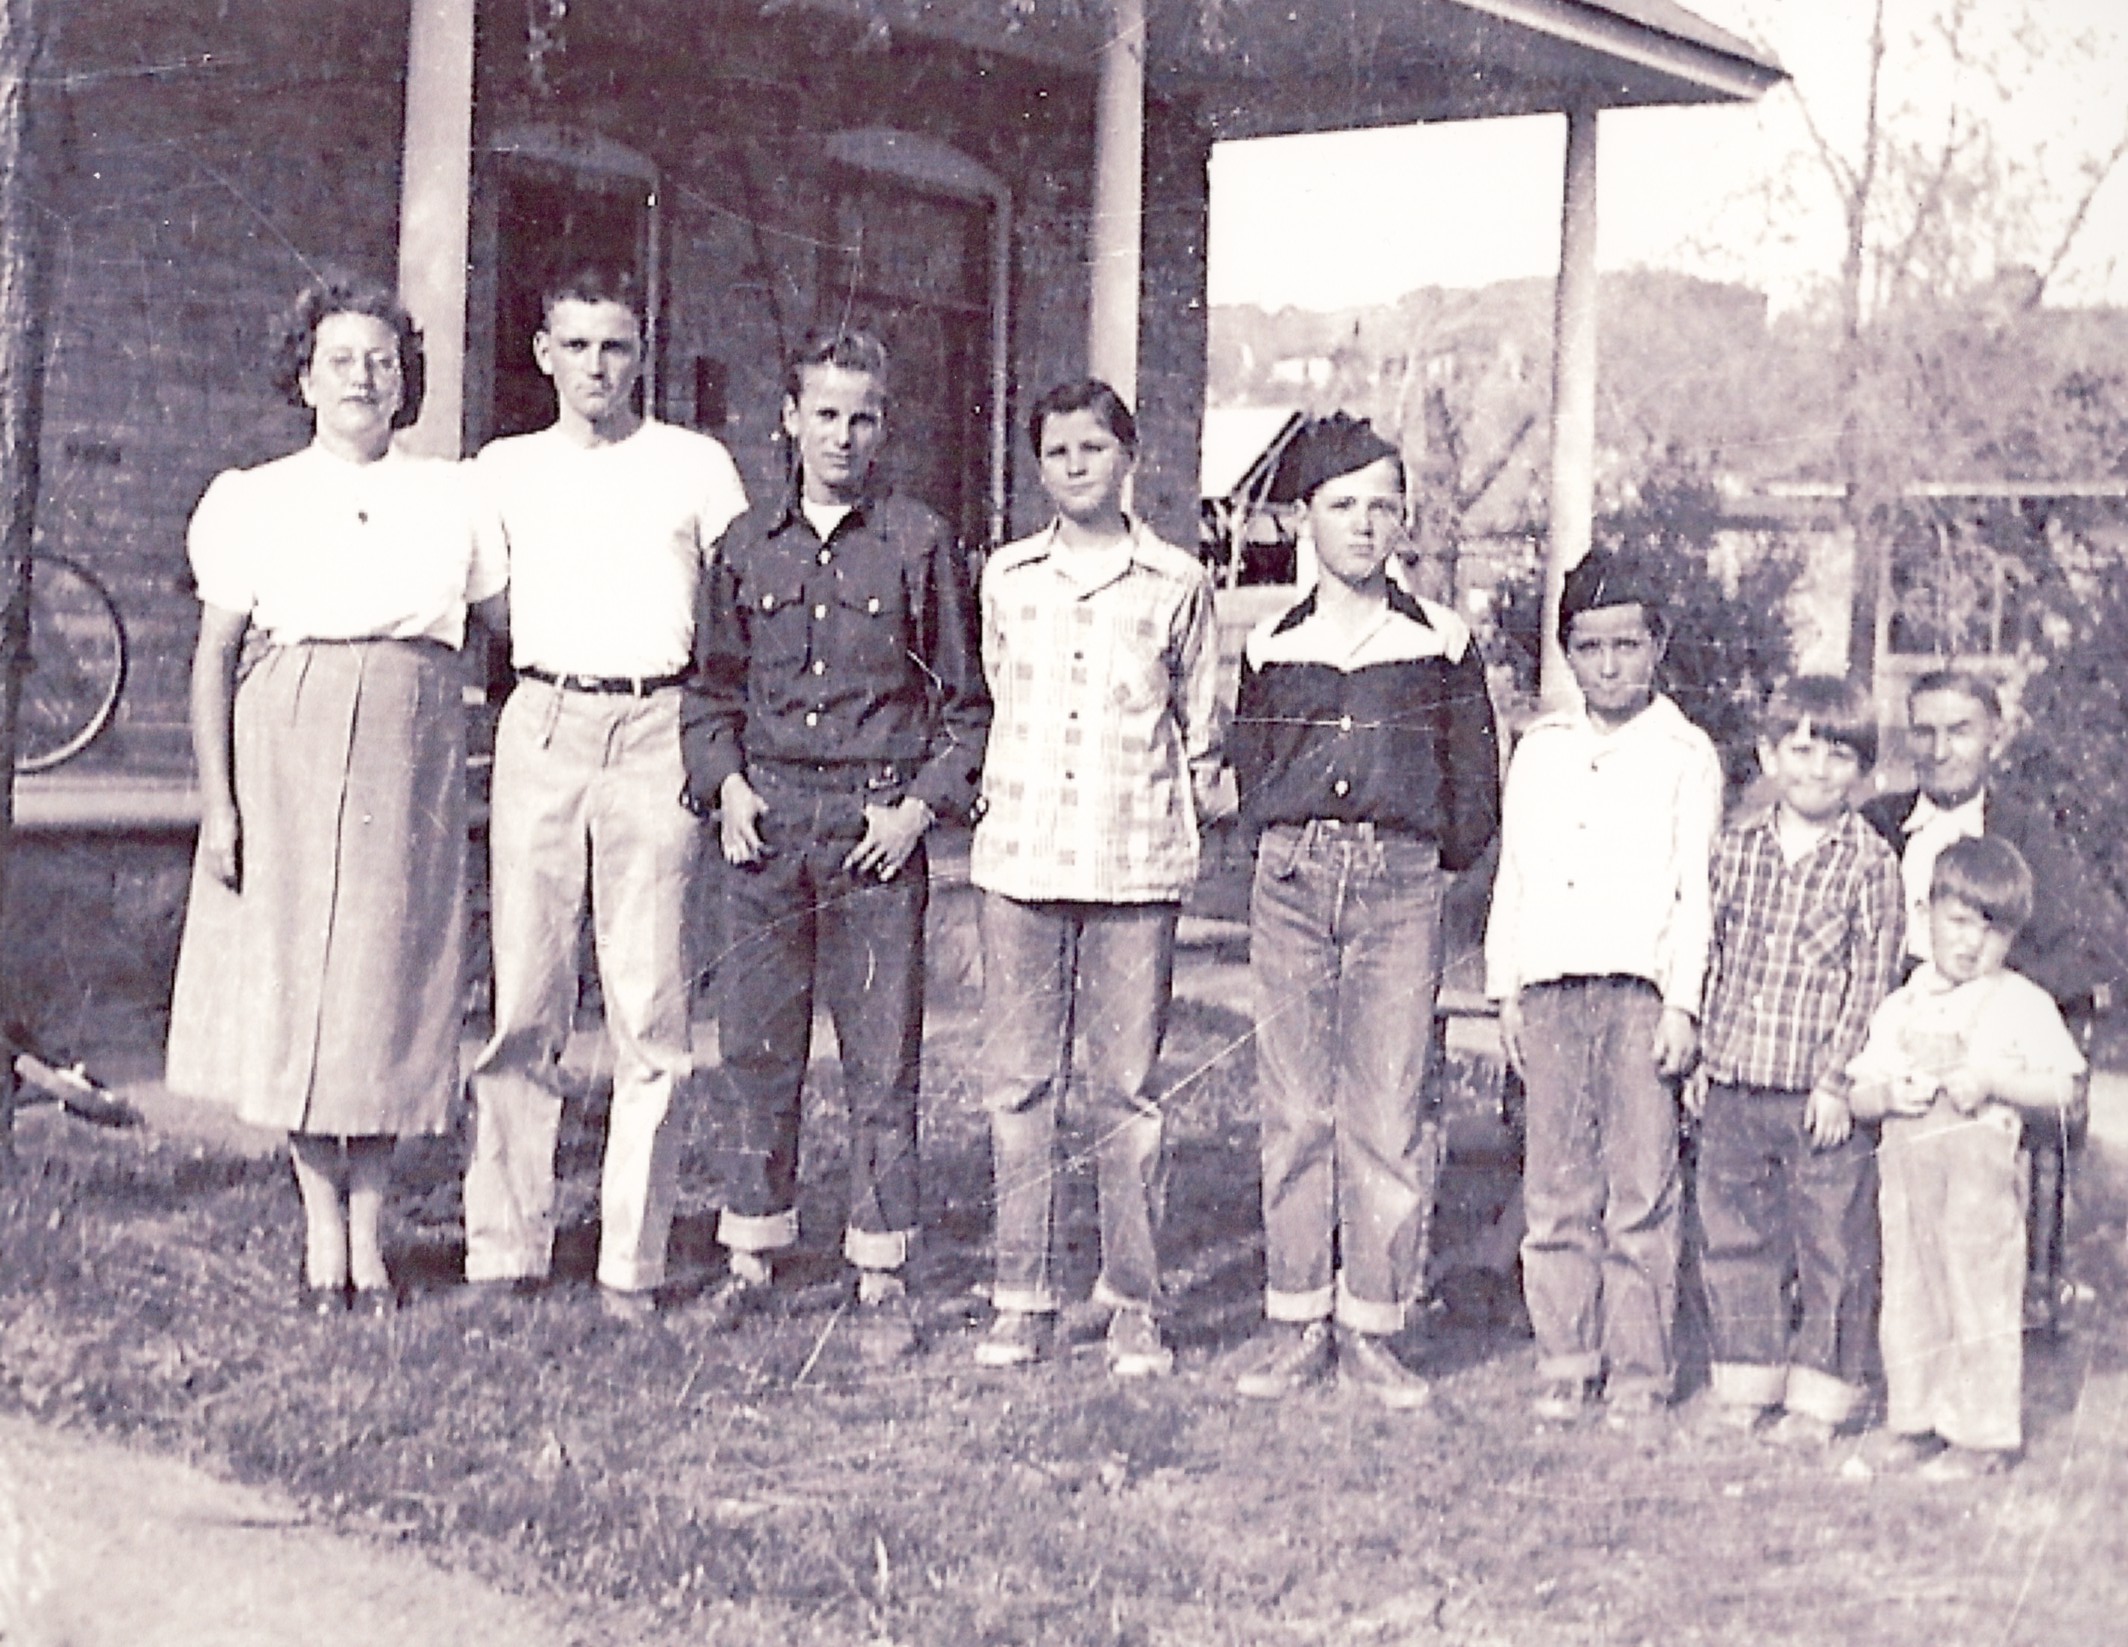 John Orson Kemple and some of his family